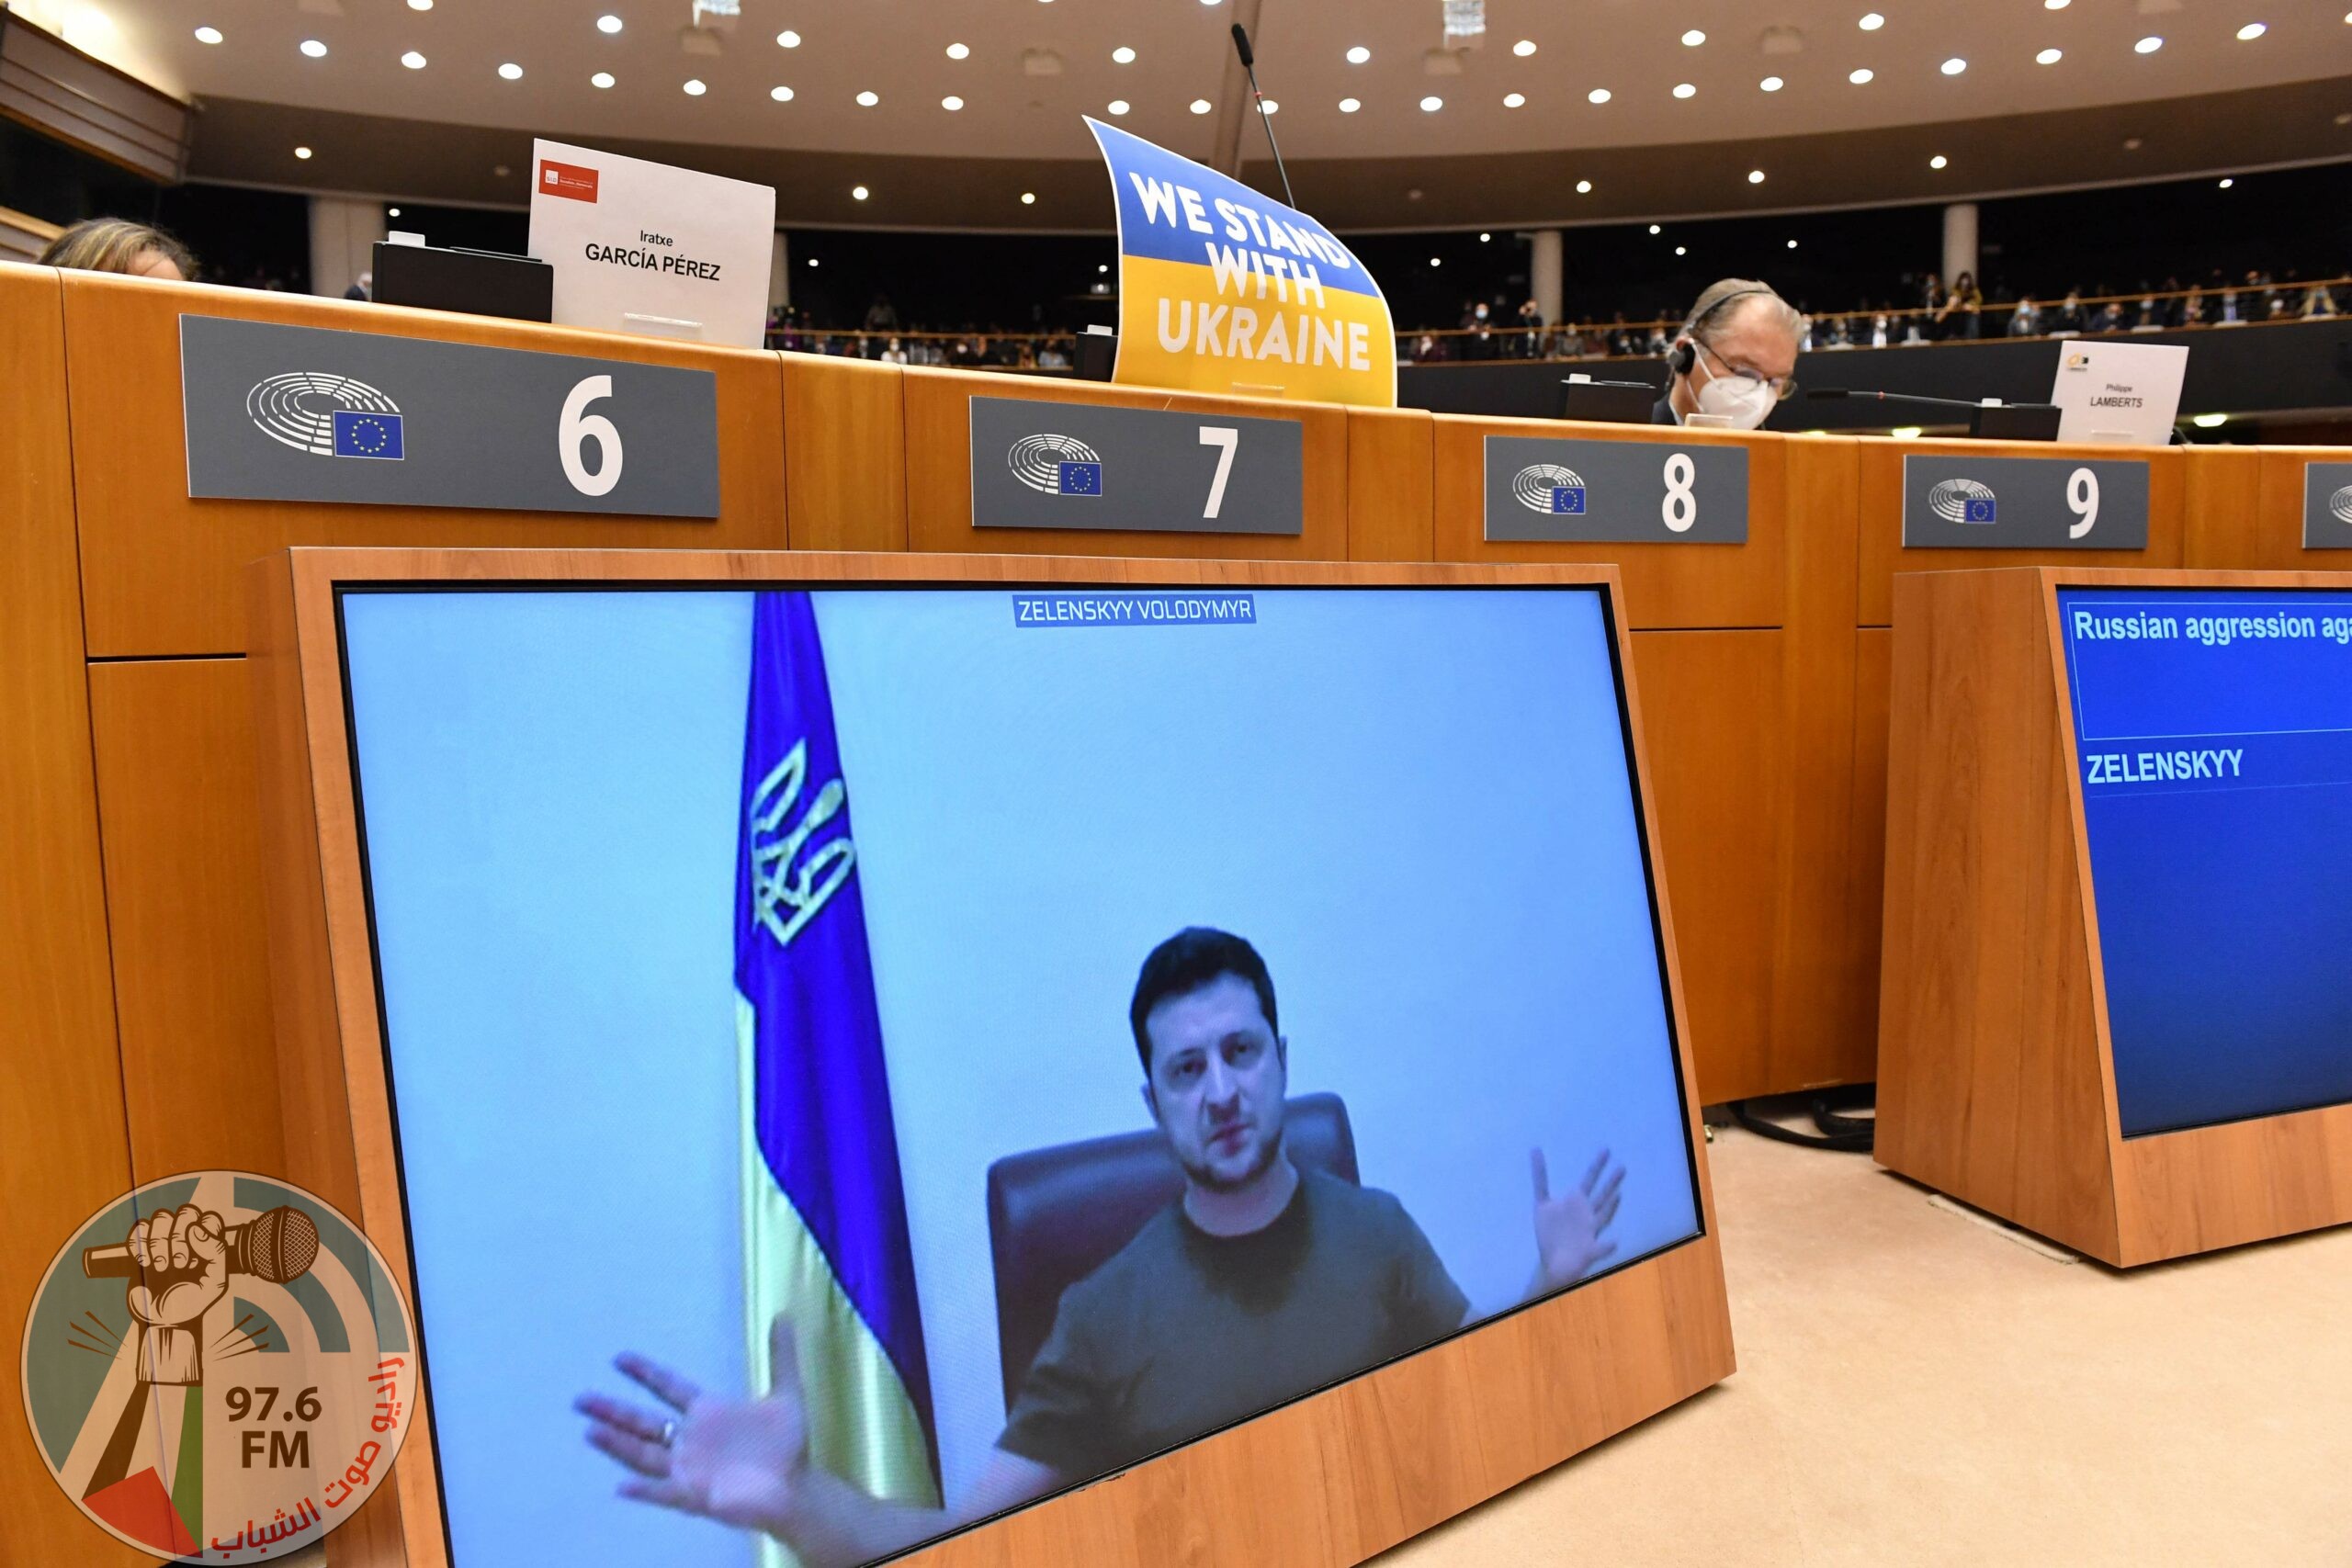 TOPSHOT - Ukrainian President Volodymyr Zelensky appears on a screen as he speaks in a video conference during a special plenary session of the European Parliament focused on the Russian invasion of Ukraine at the EU headquarters in Brussels, on March 01, 2022. The European Commission has opened the door for Ukraine to join the EU, but this is not for tomorrow, despite Kiev's request for a special procedure to integrate the country "without delay". (Photo by JOHN THYS / AFP)